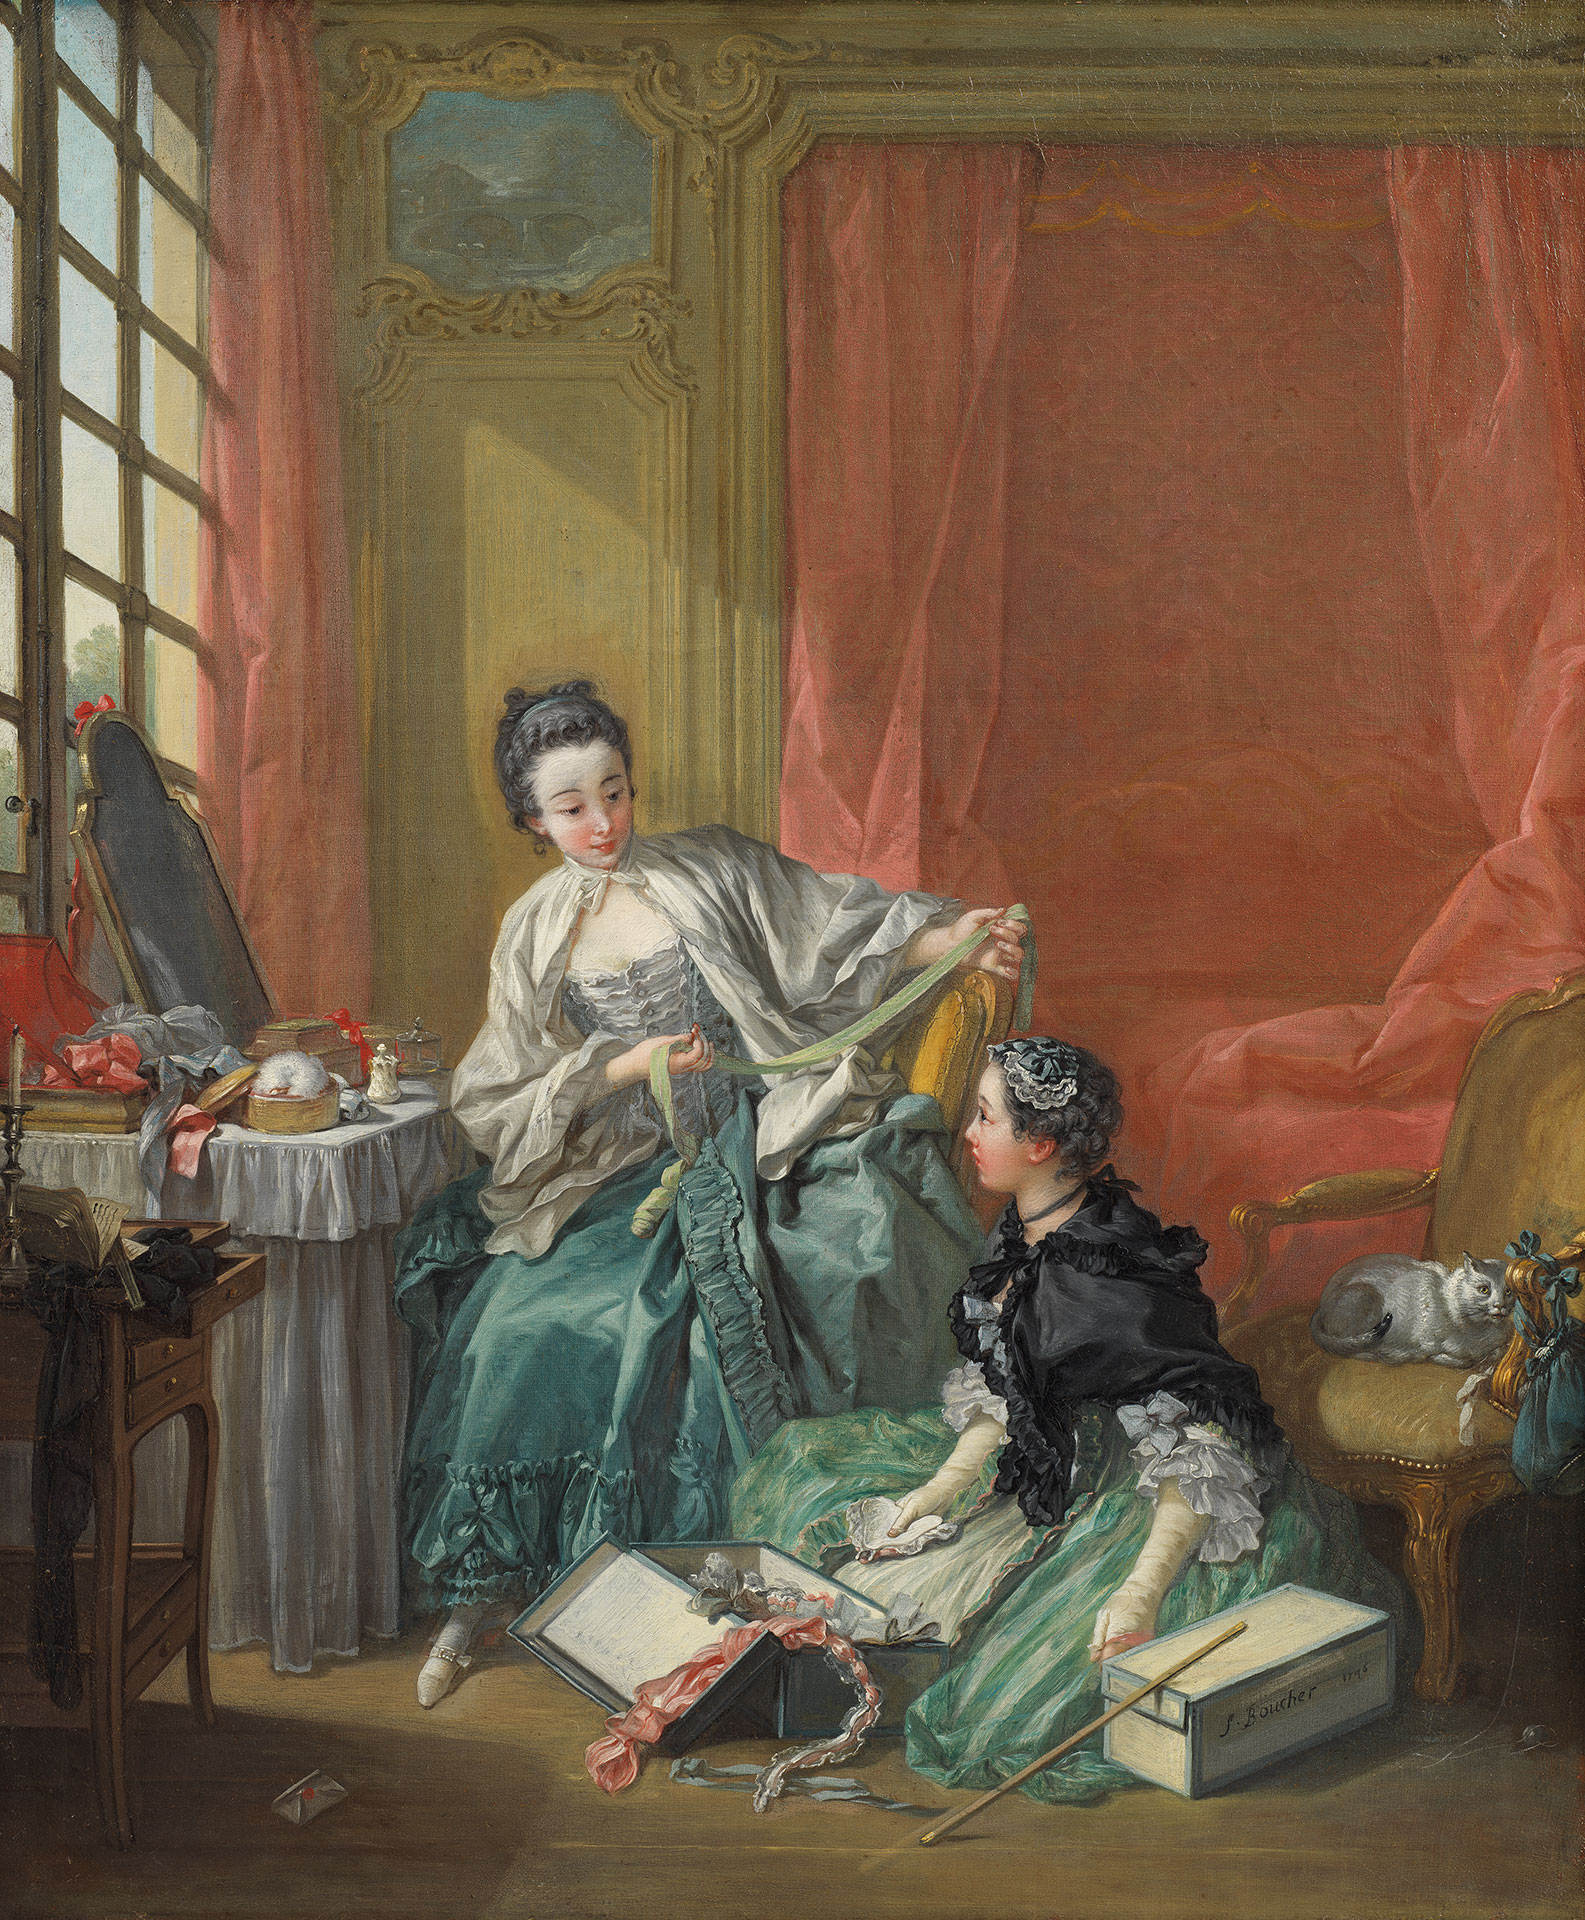 Painting The Milliner by François Boucher. The picture shows two women in front of a dressing table. Both appear to be looking for something in a box on the floor.